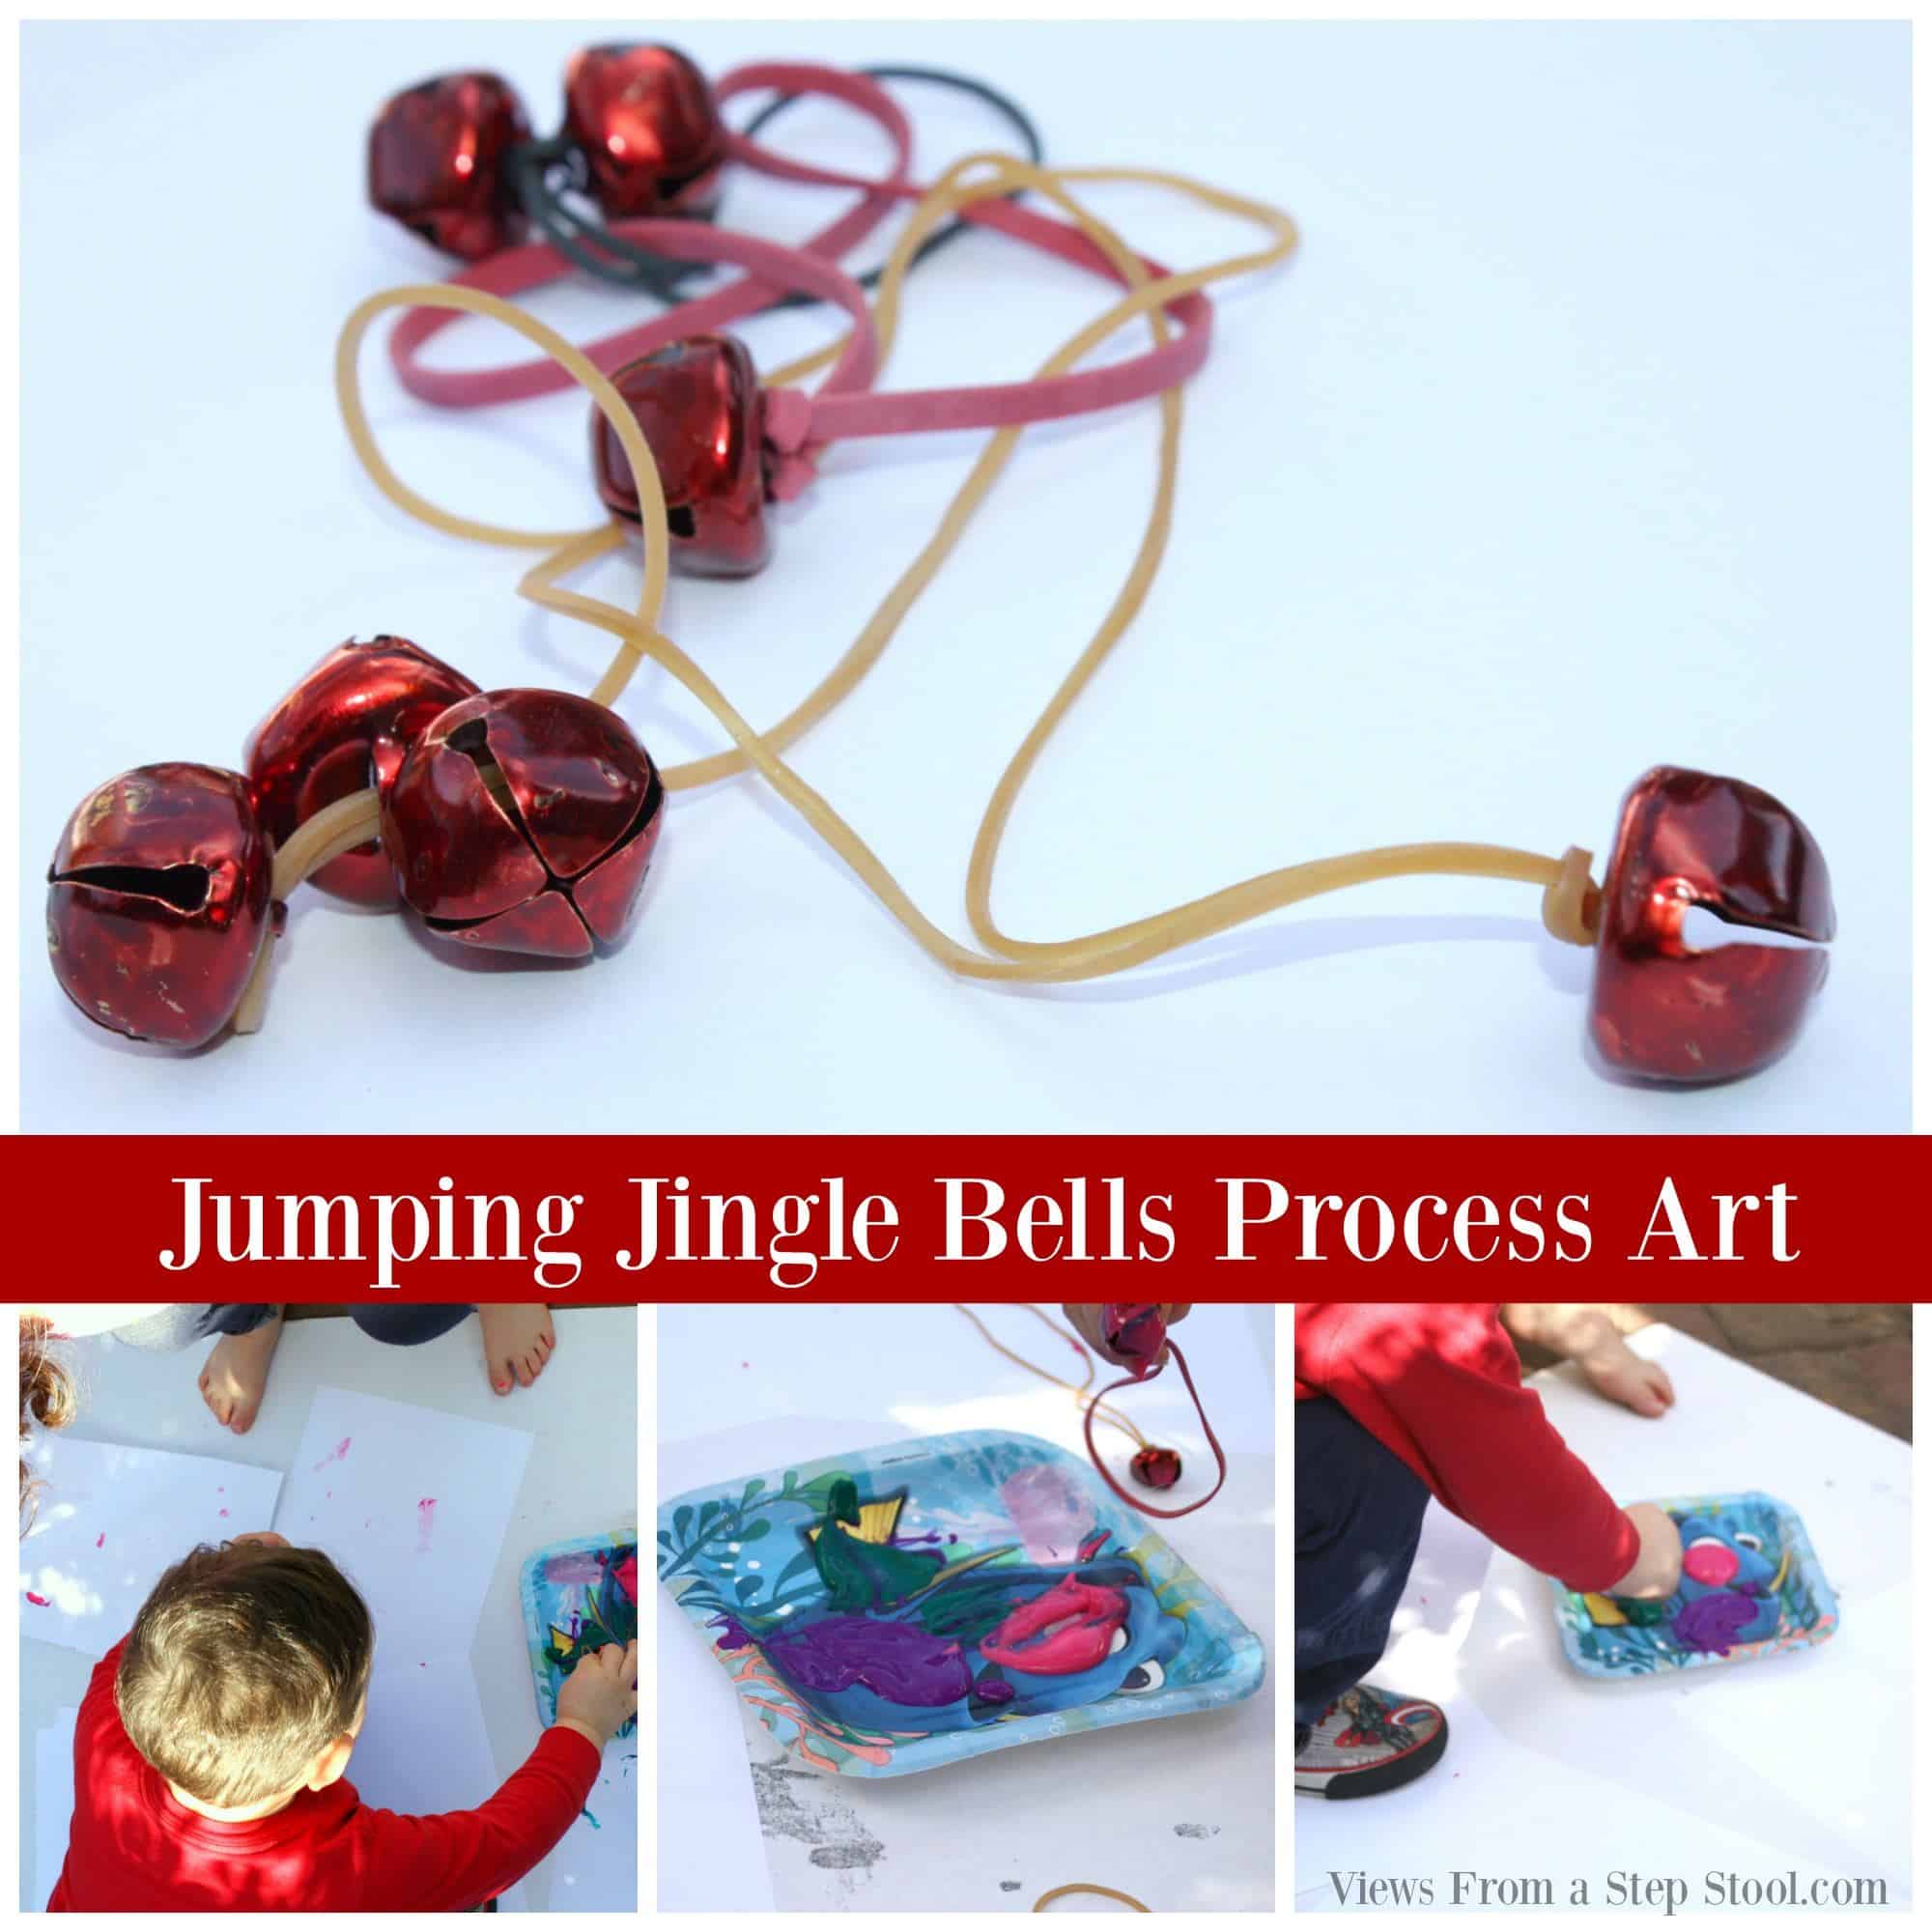 This jingle bells process art activity is a great way to celebrate the holidays while engaging all of the senses through learning and play!